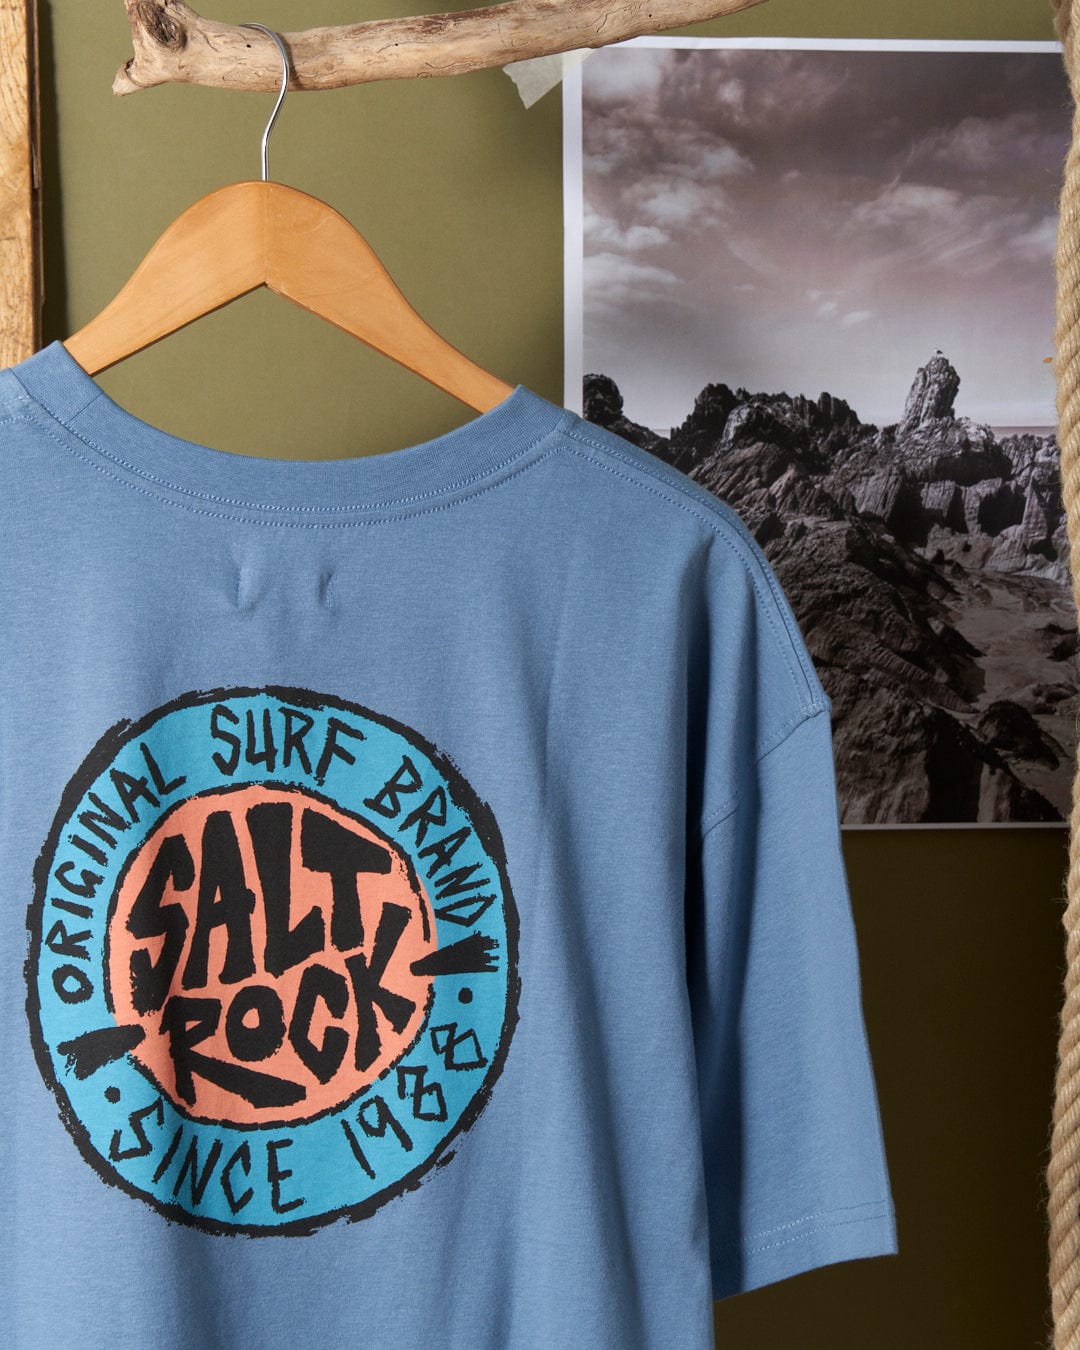 A **SR Original - Mens Short Sleeve T-Shirt - Blue** with the "Saltrock" logo, in an oversized fit, hangs on a wooden hanger in front of a mountainous landscape photograph.